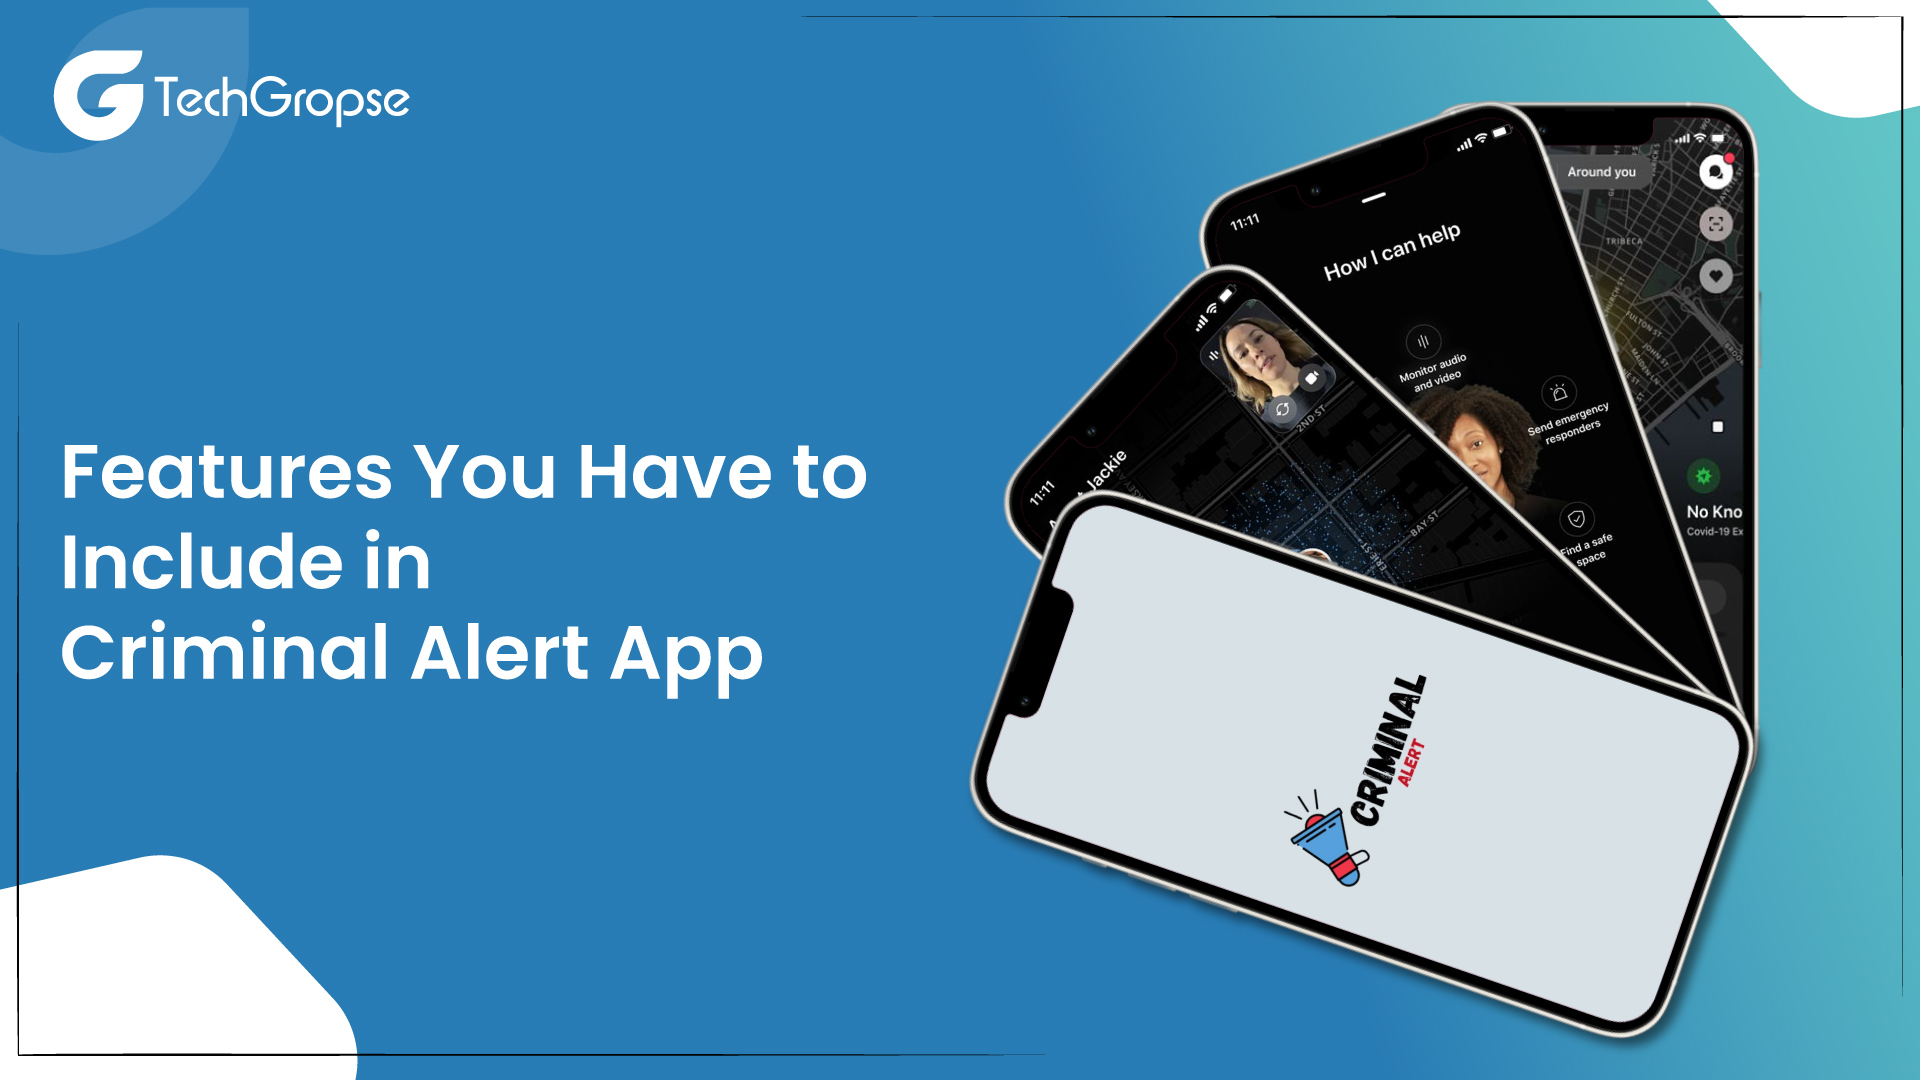 Features You Have to Include in Criminal Alert App